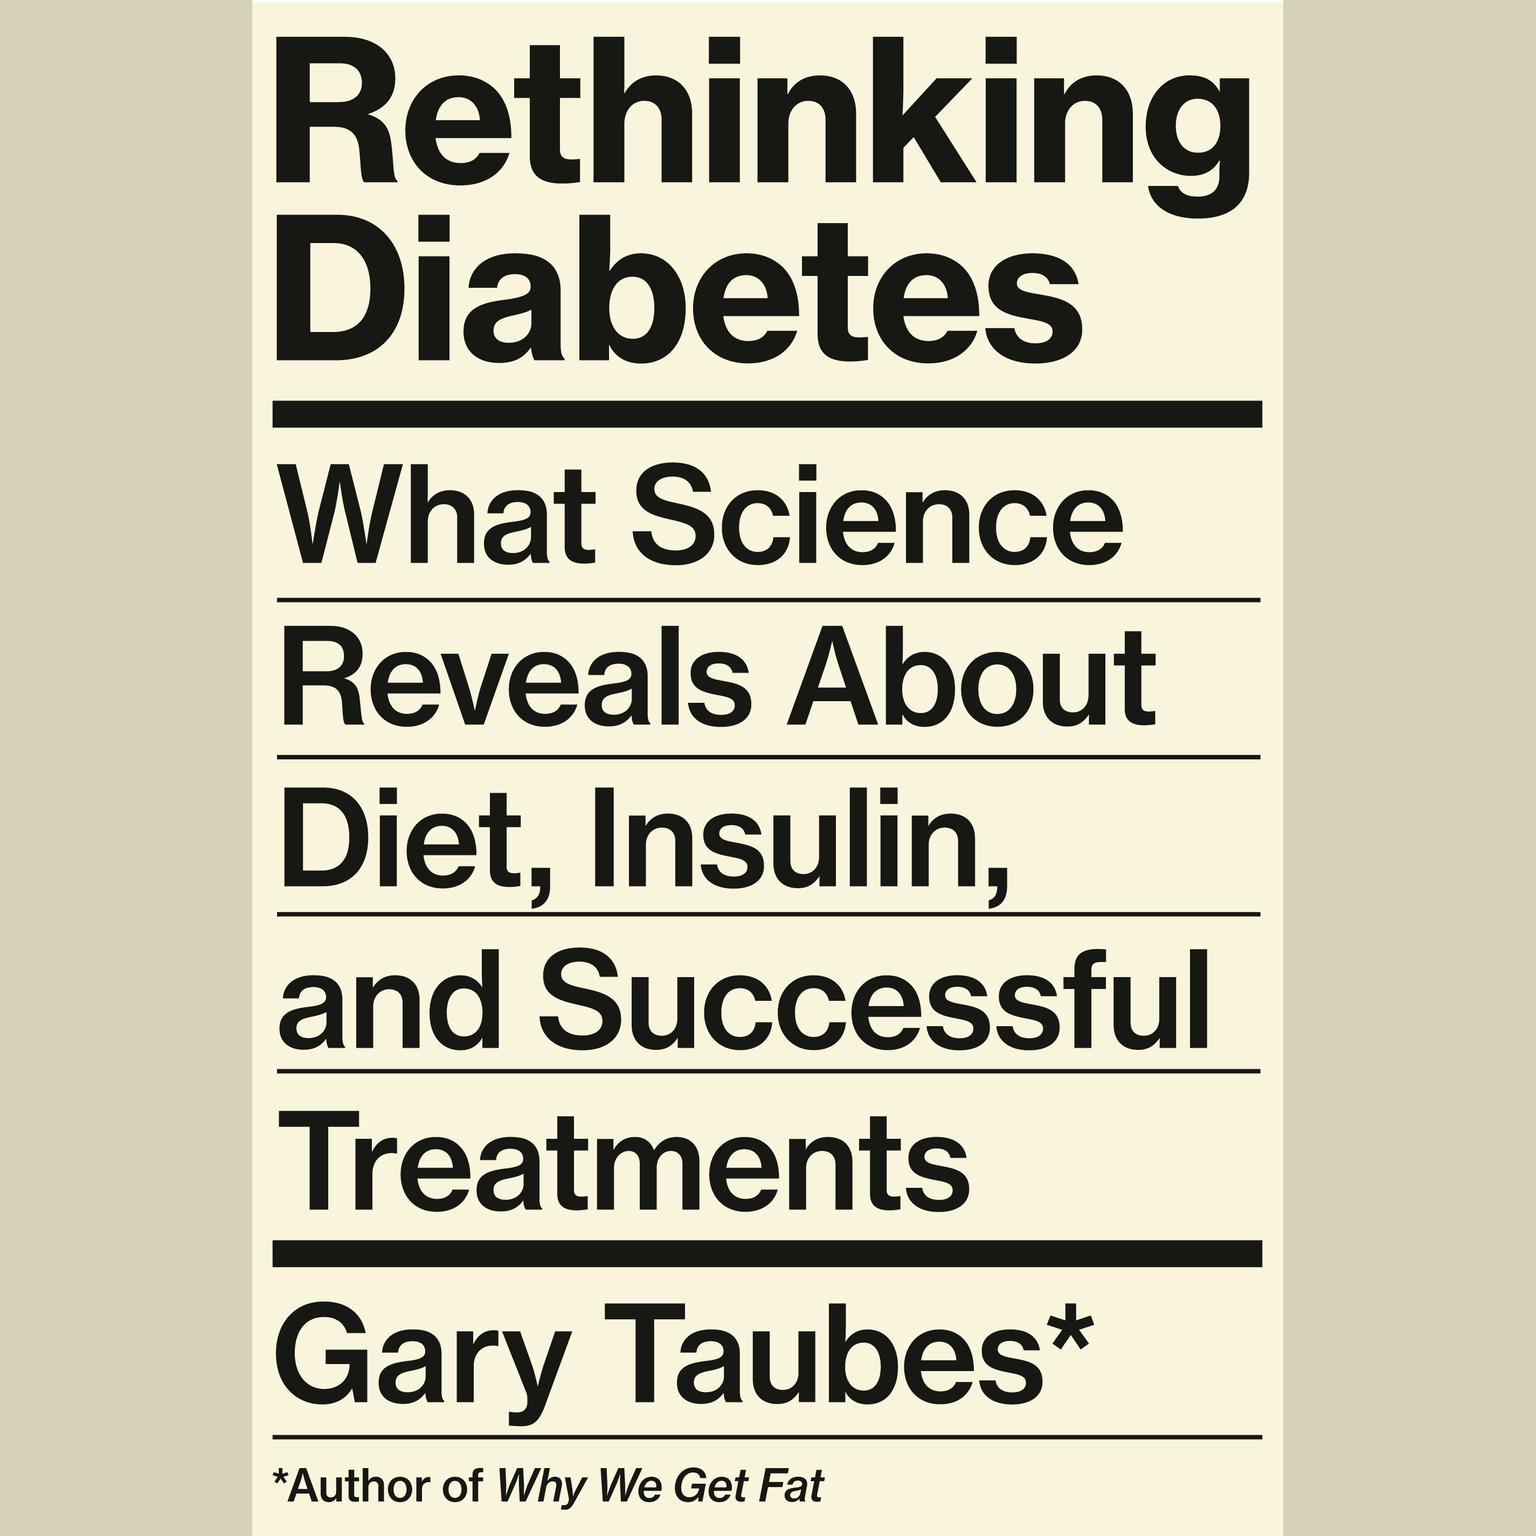 Rethinking Diabetes: What Science Reveals About Diet, Insulin, and Successful Treatments Audiobook, by Gary Taubes